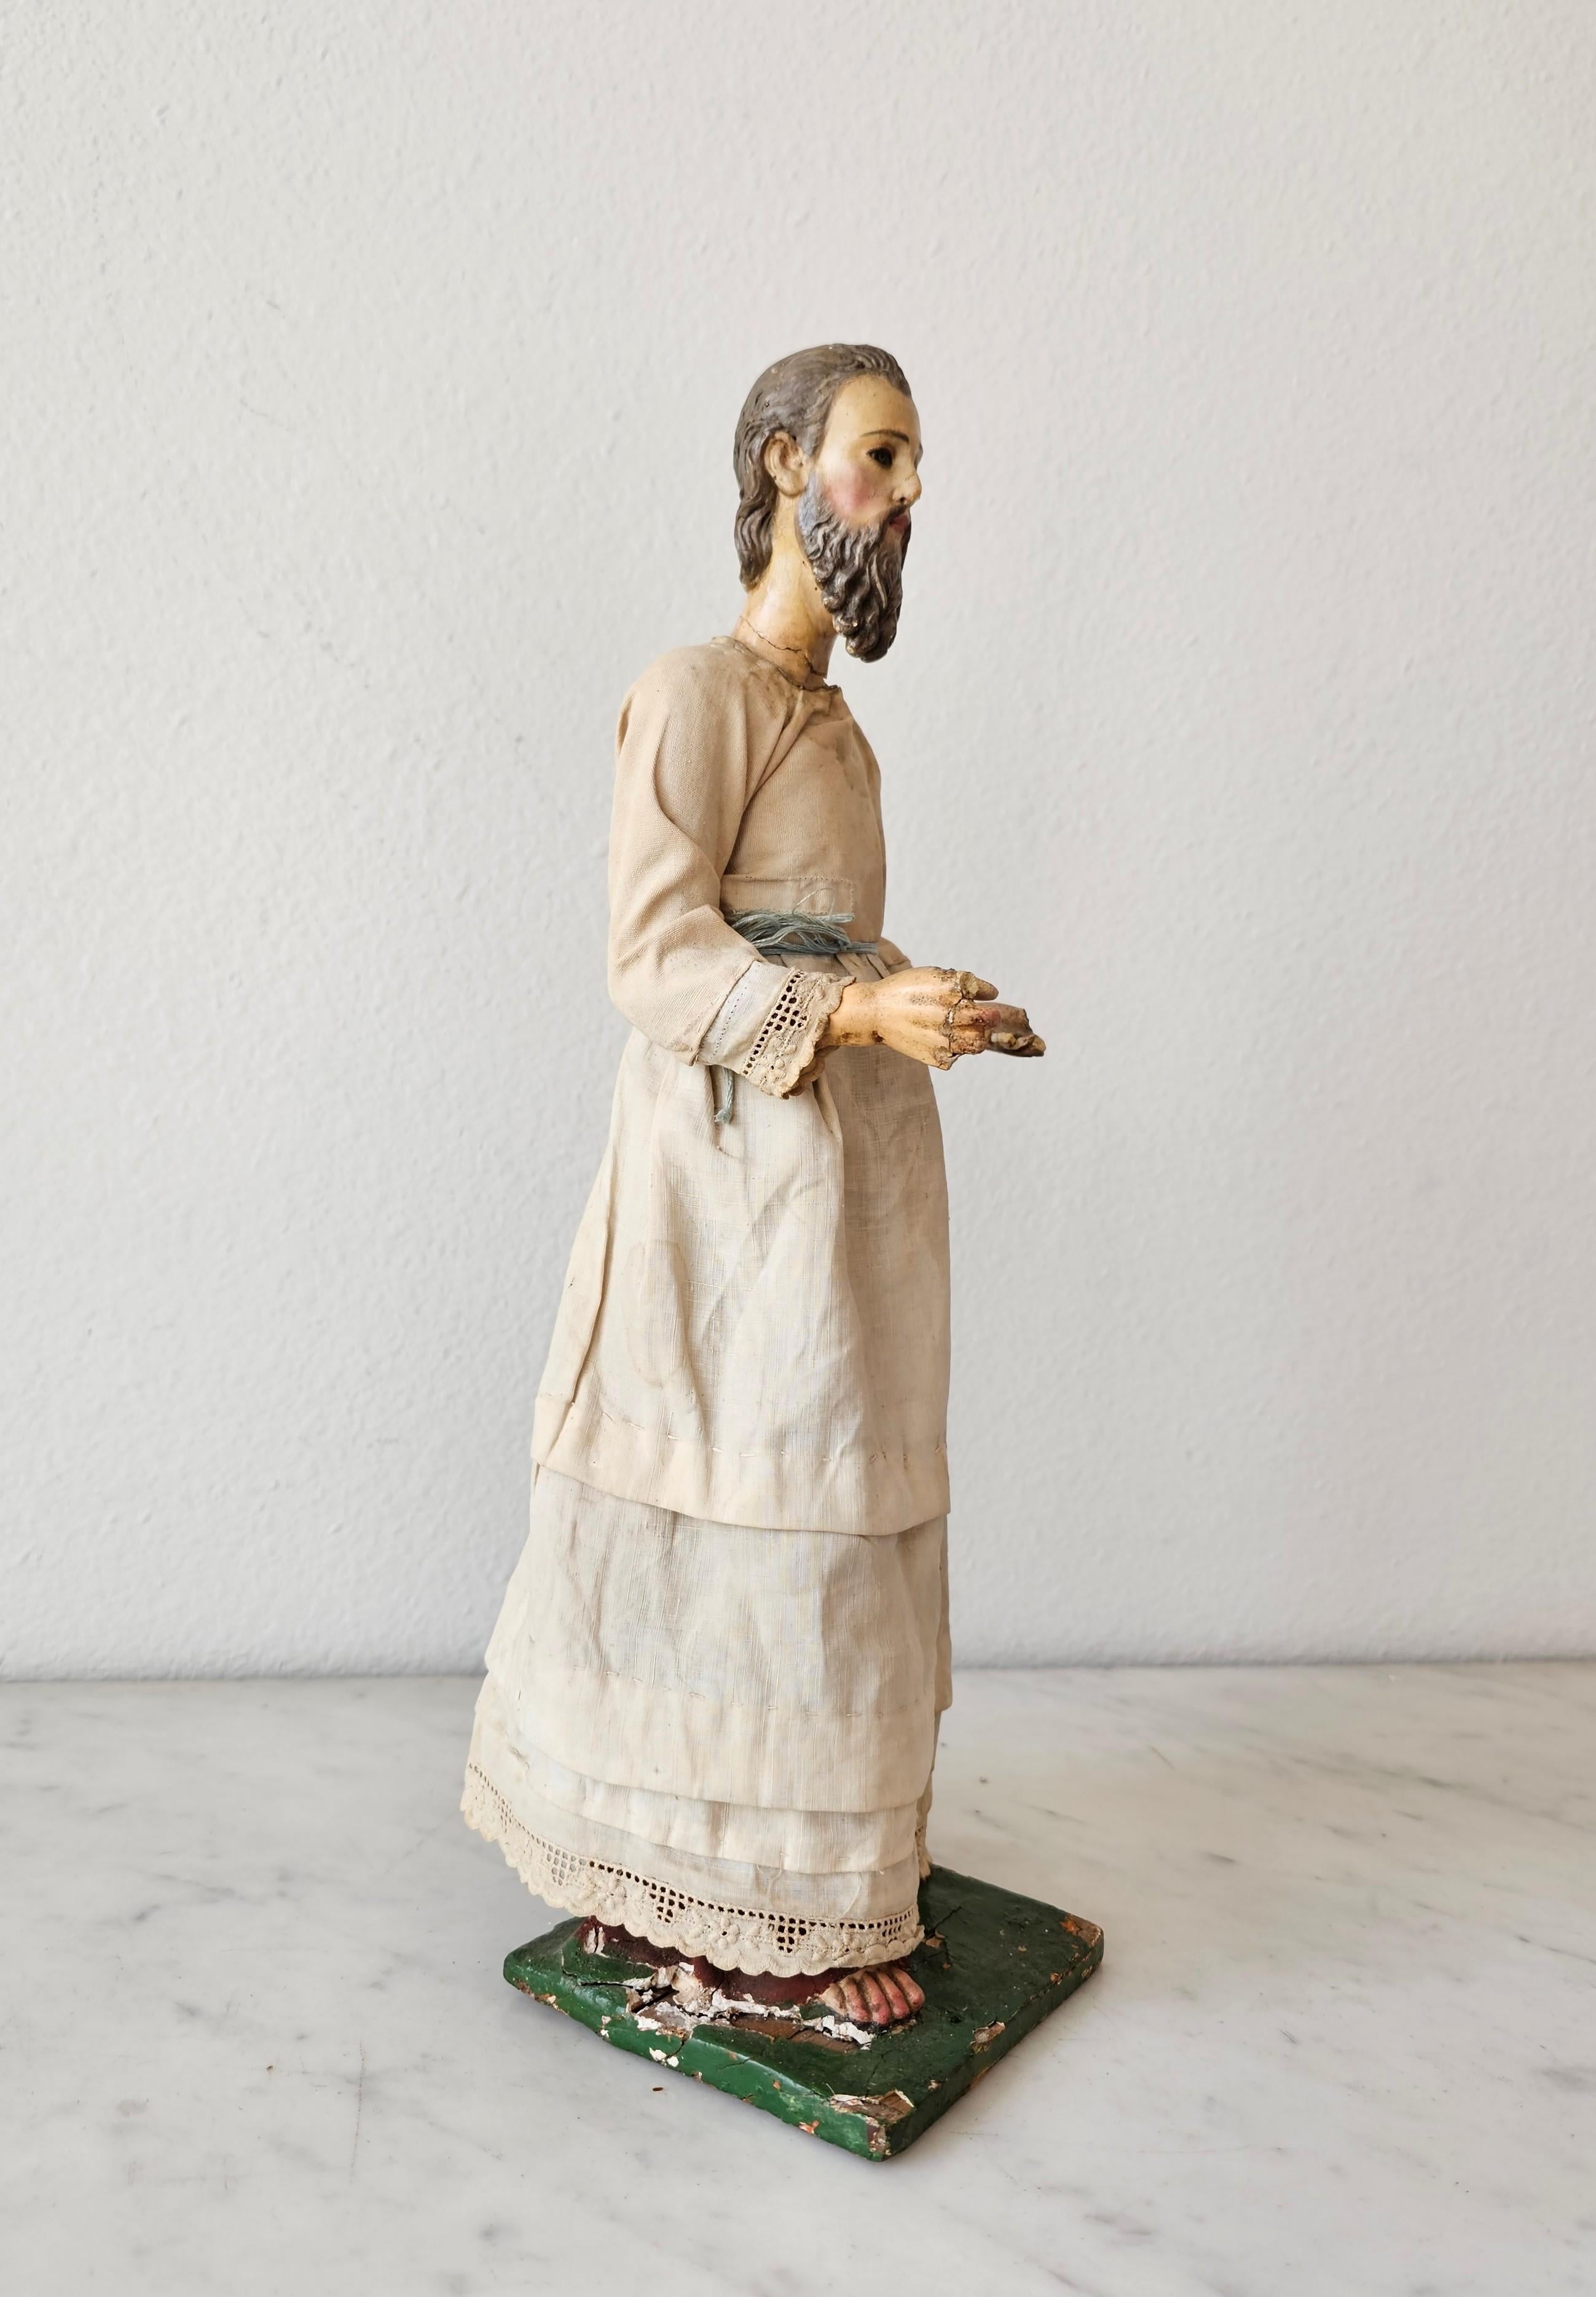 Hand-Carved 17th/18th Century Baroque Period Carved Polychrome Santo Altar Statue For Sale